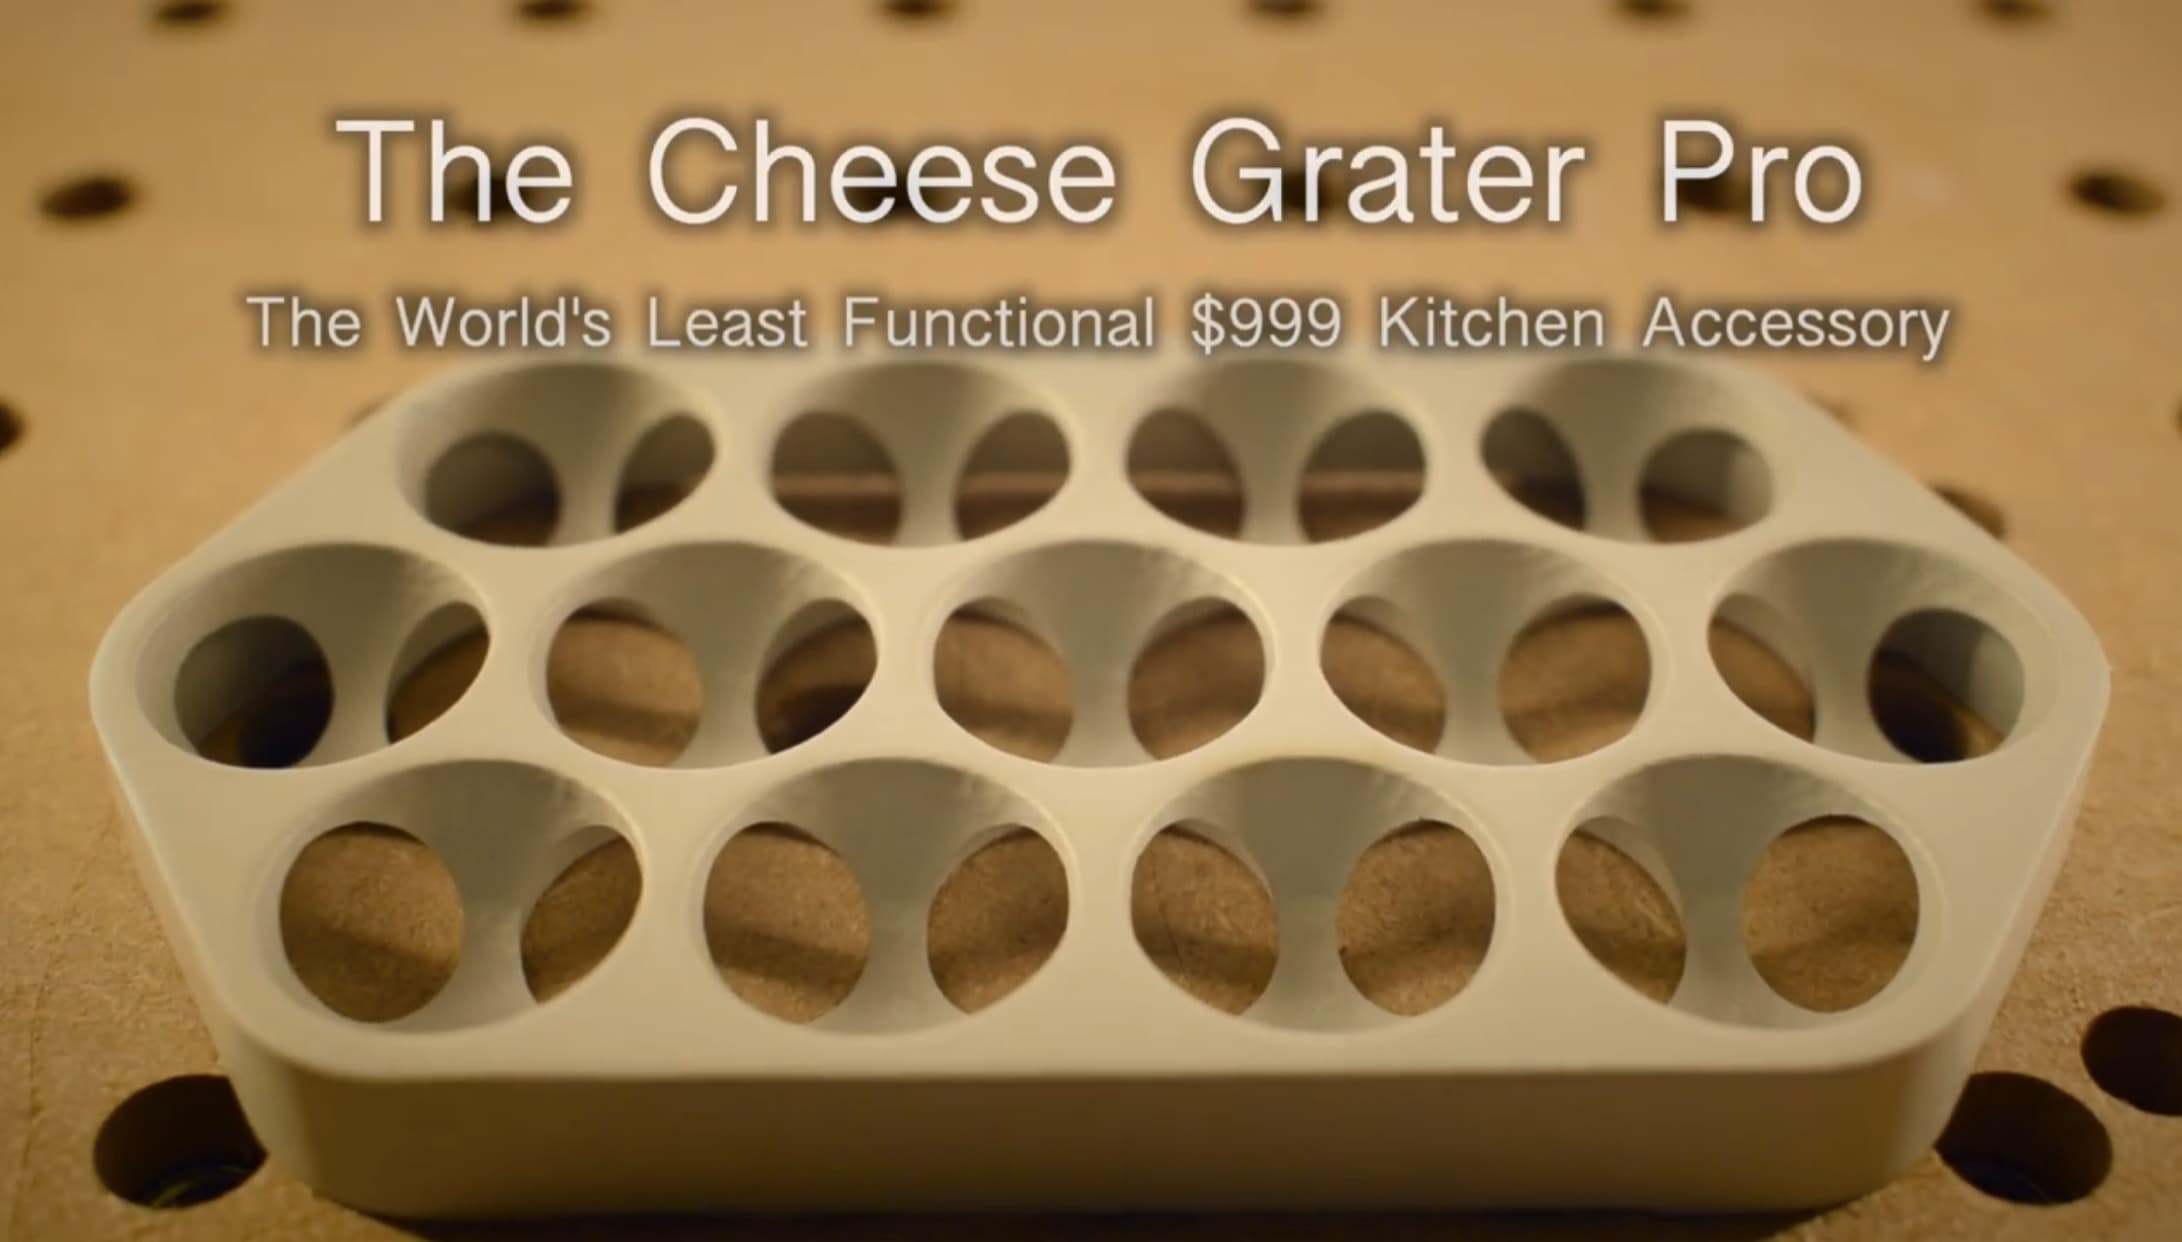 Cheese grater pro